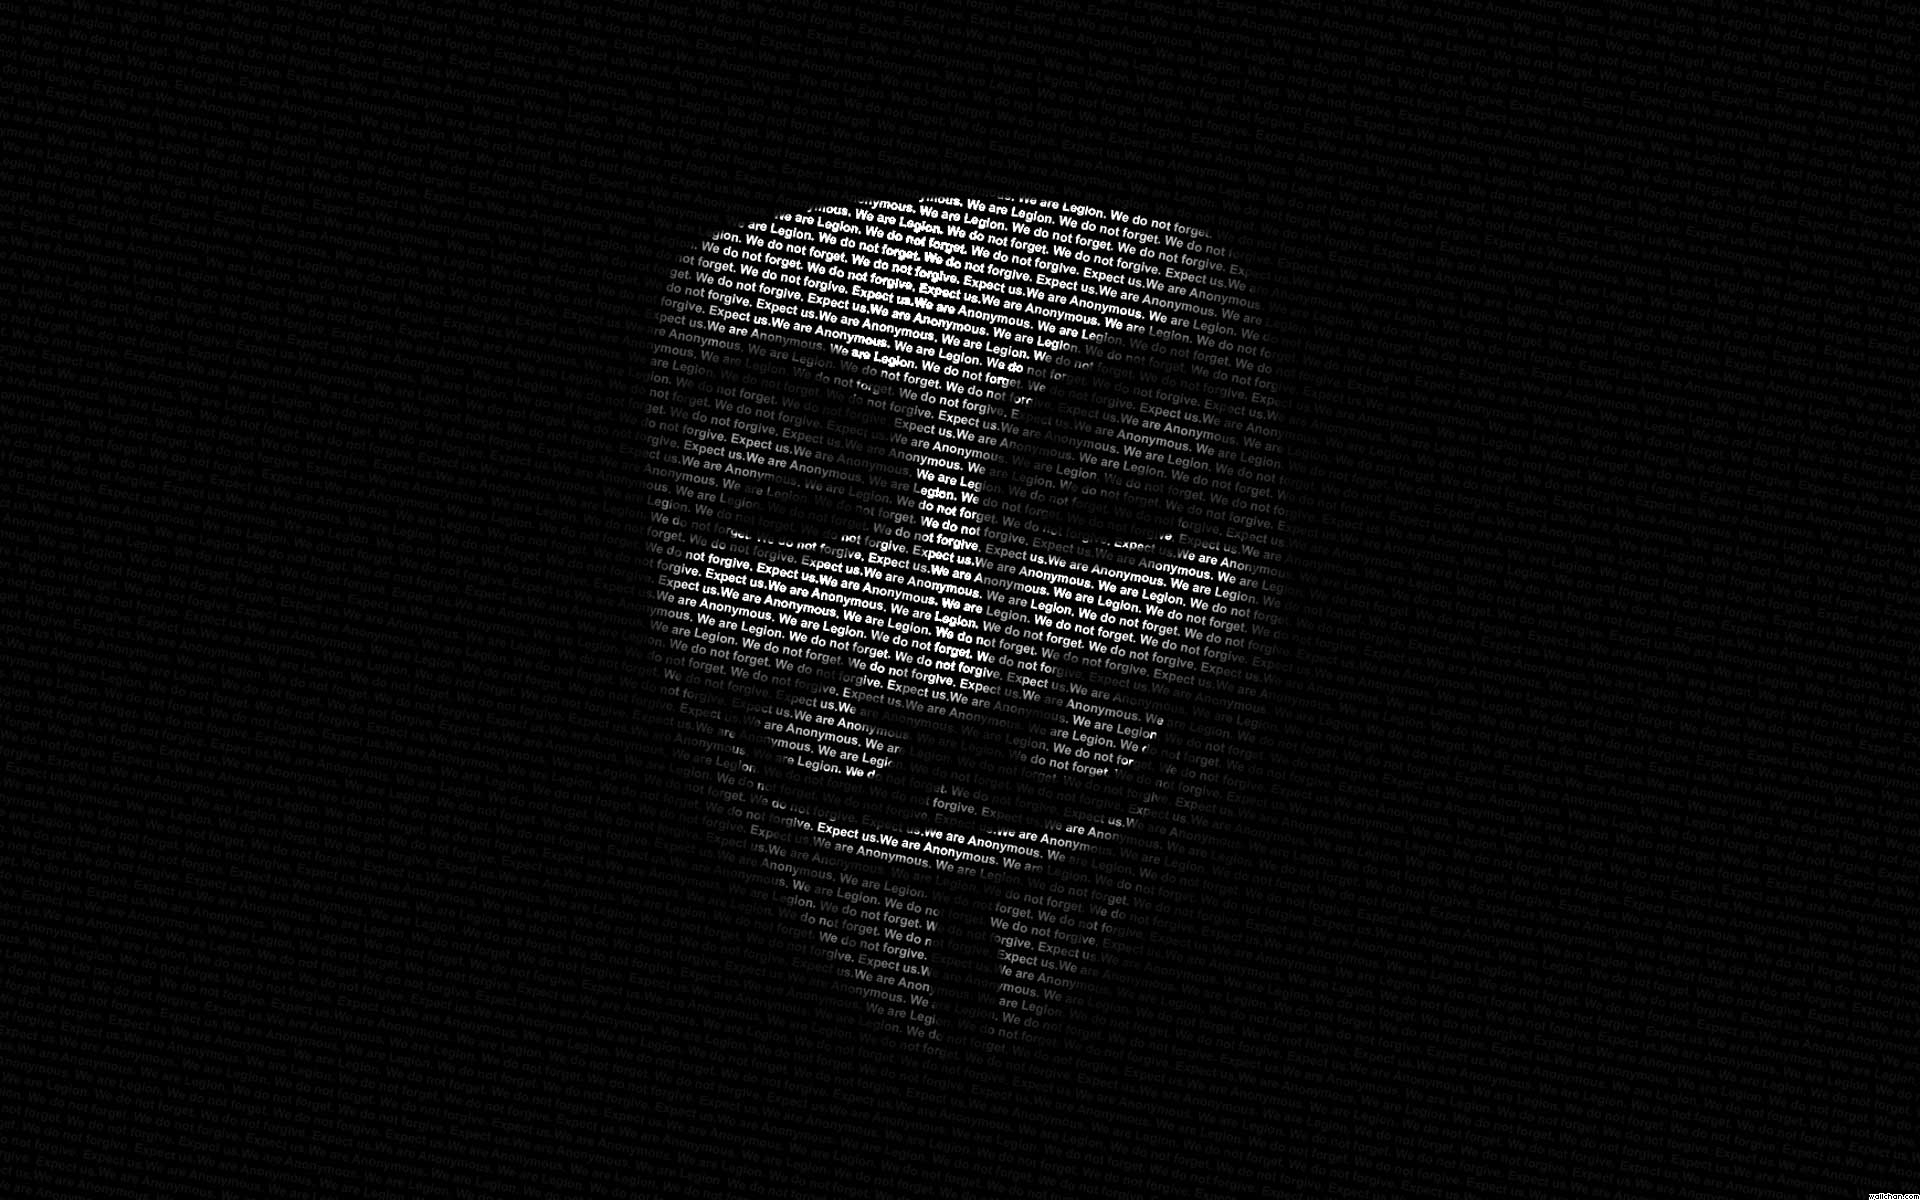 Mask Anonymous Monochrome Simple Background Guy Fawkes Mask Black Background Typography 1920x1200